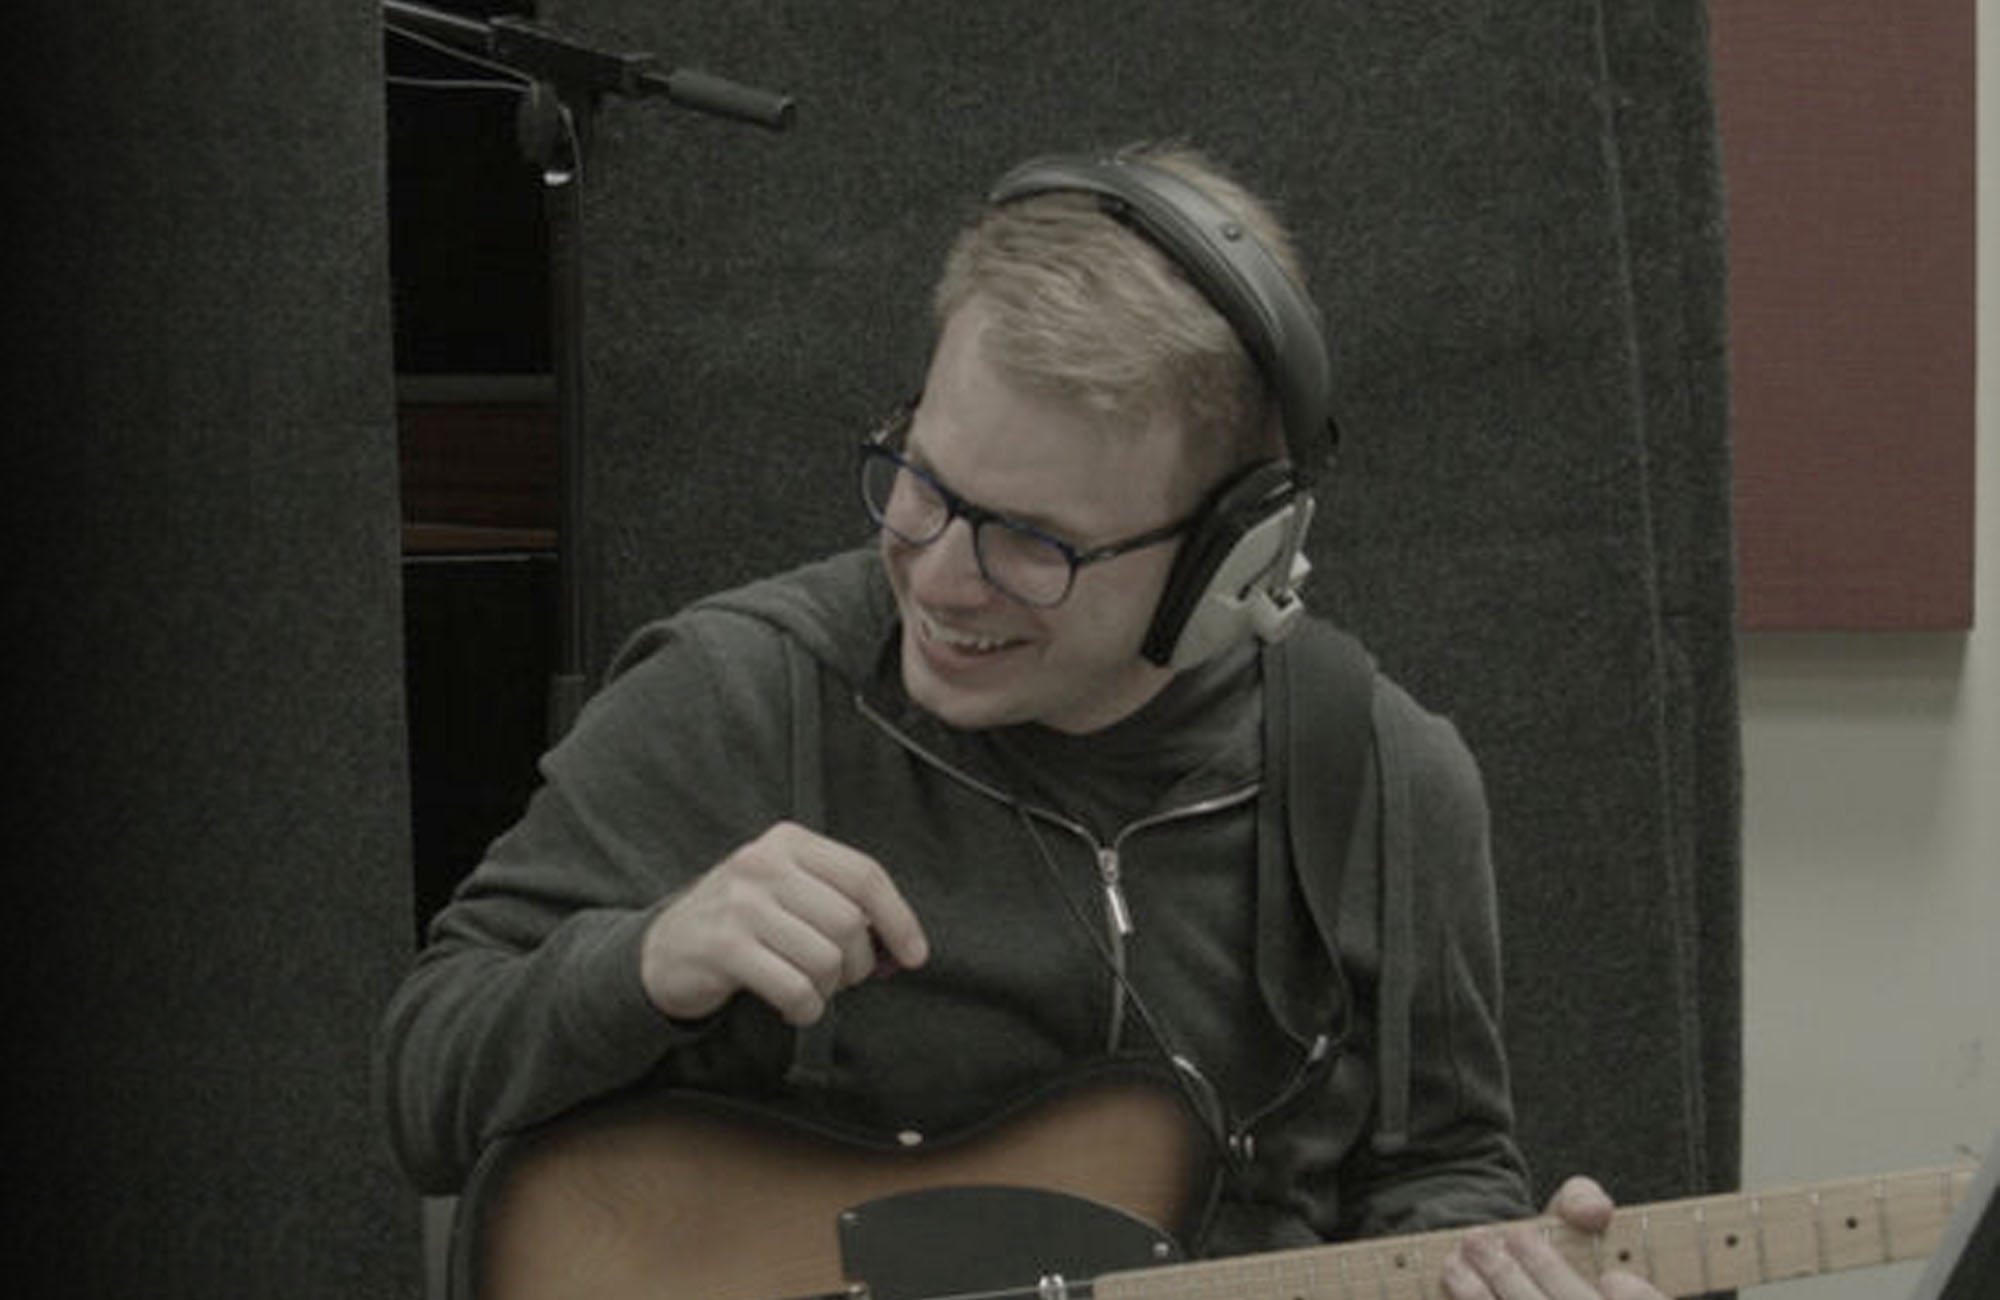 image of Chris Cresswell holding guitar and wearing headphones